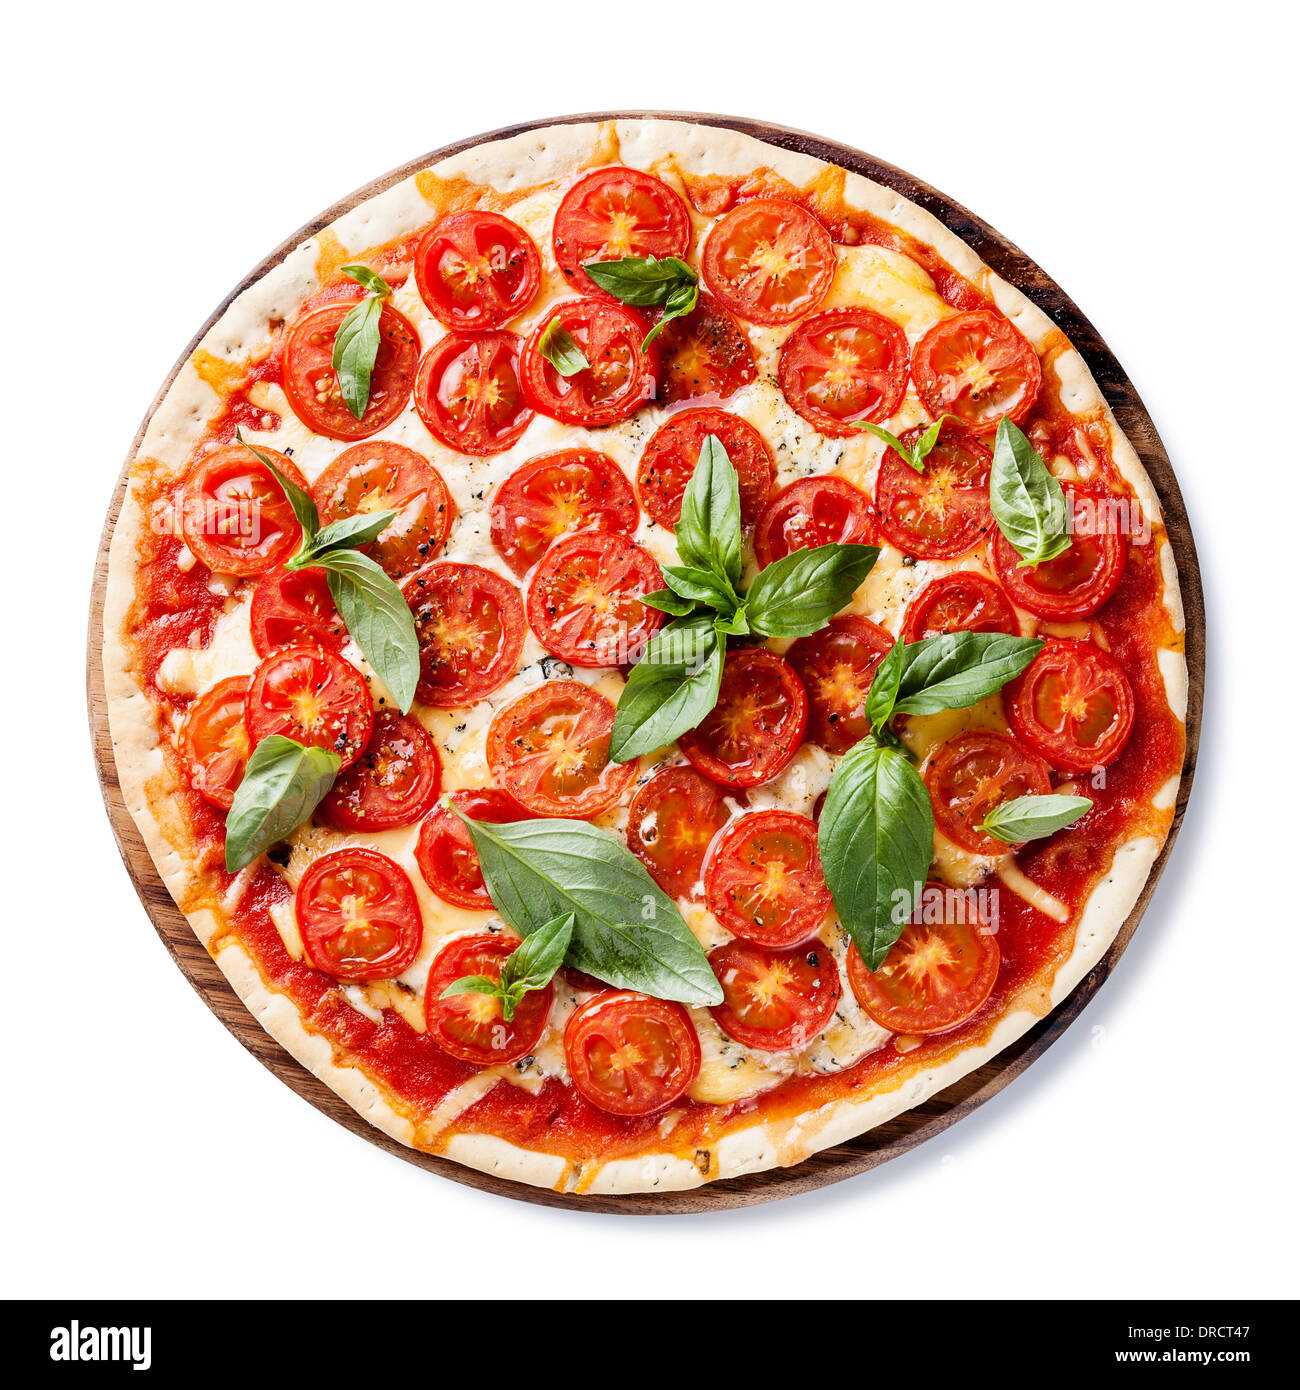 Italian pizza with cherry tomatoes and green basil on white background Stock Photo